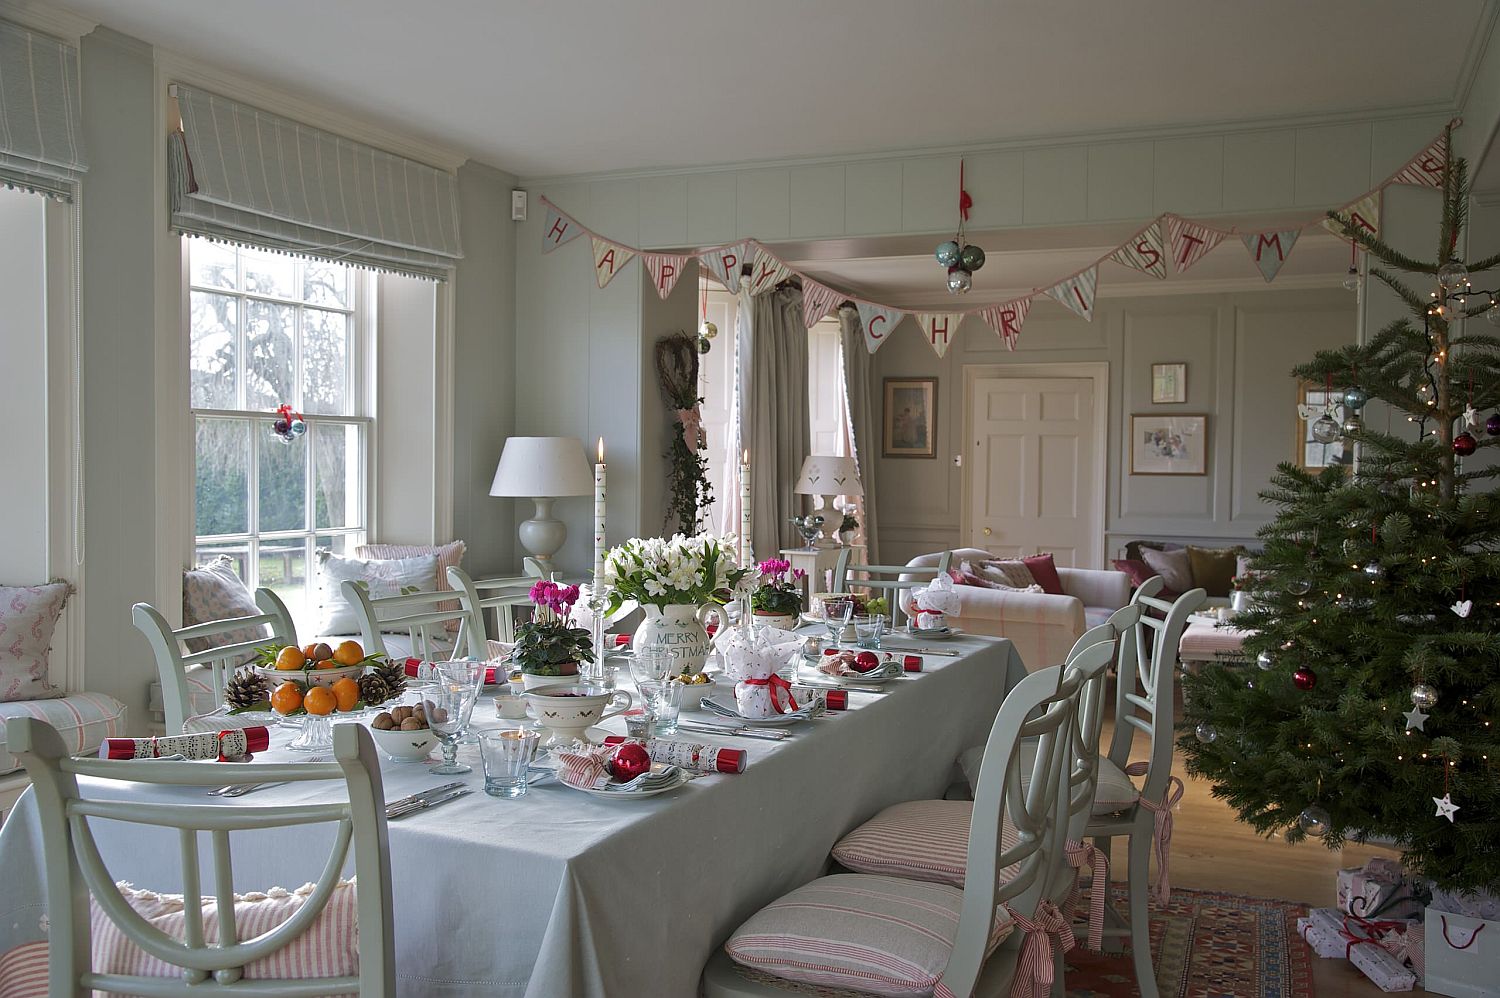 Banners-baubles-and-Christmas-ornaments-transform-this-farmhouse-dining-room-into-one-with-Holiday-cheer